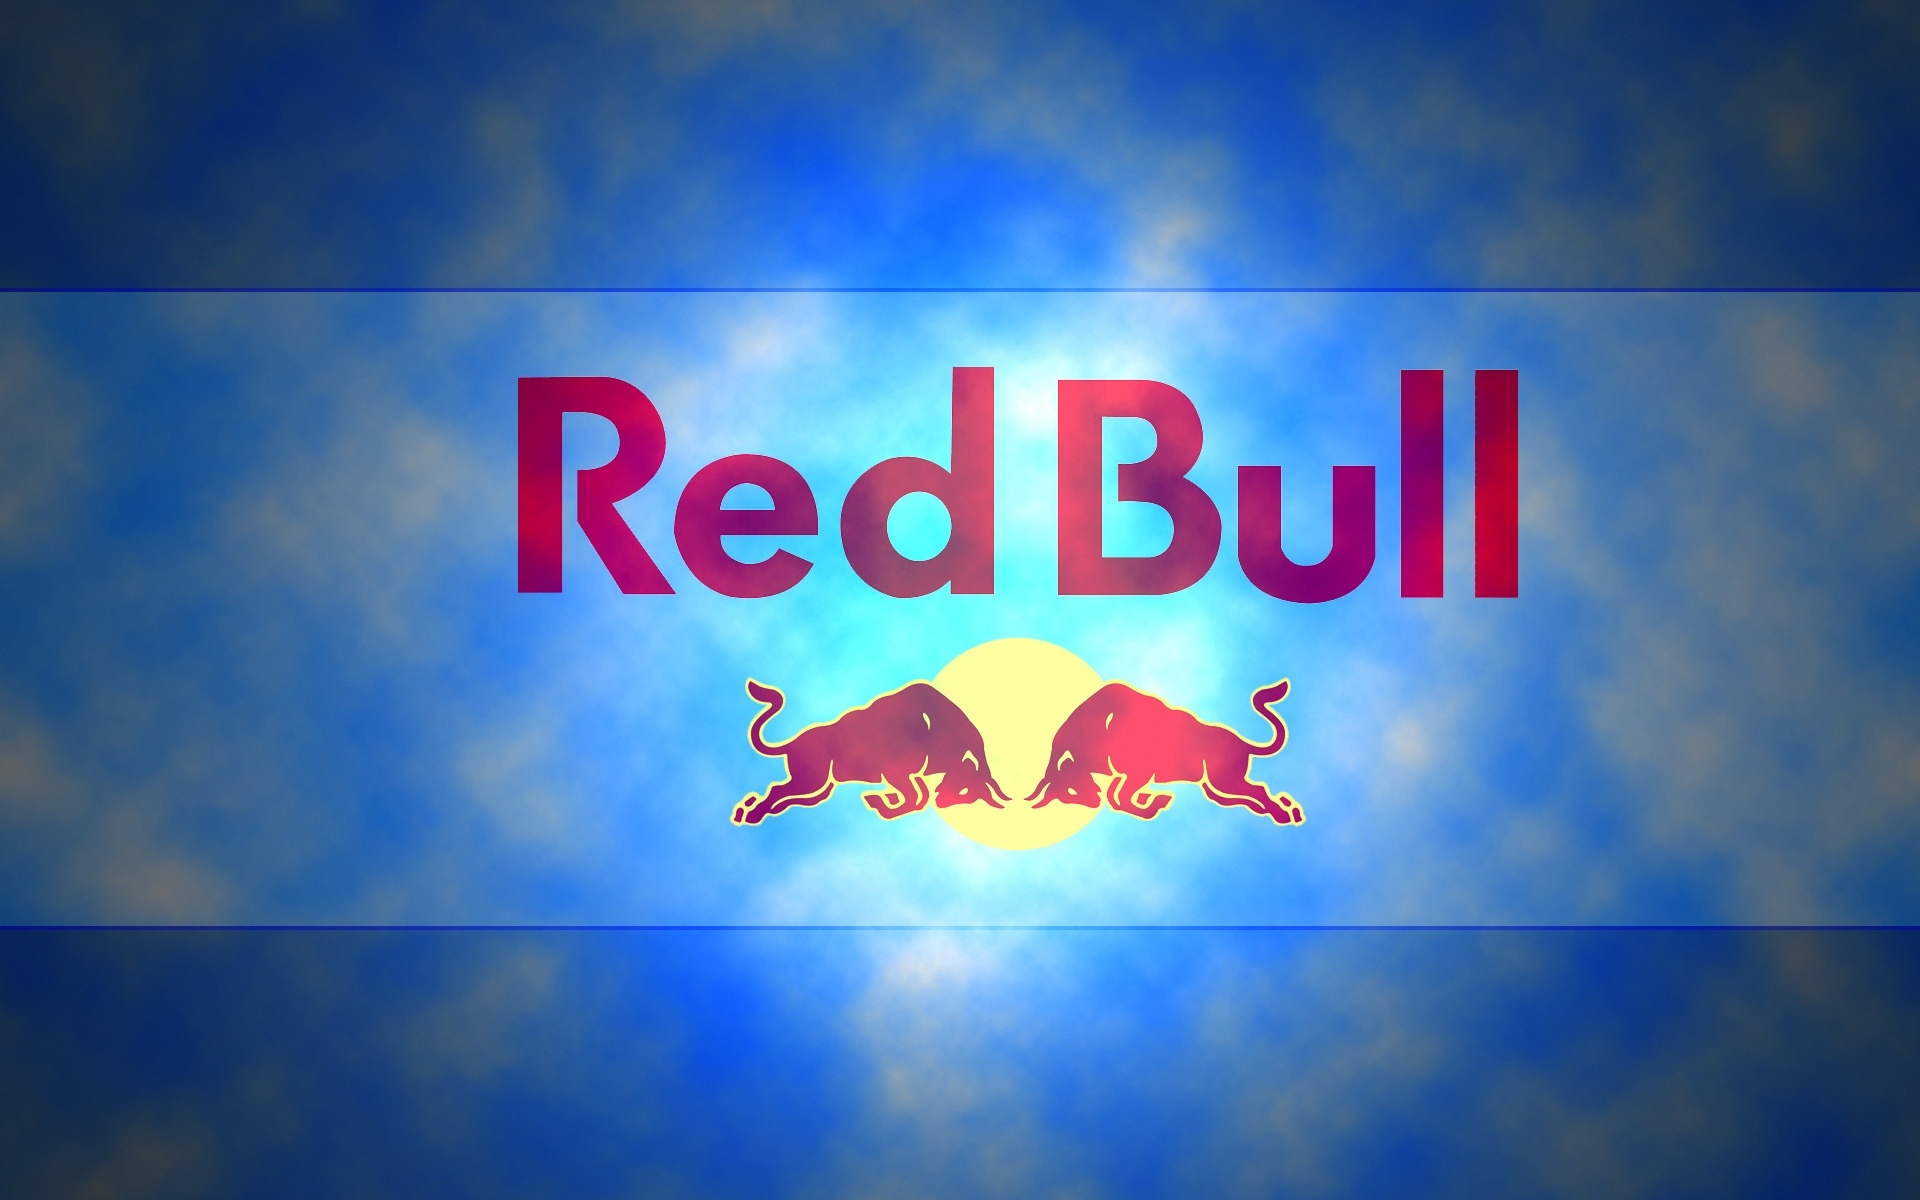 Red Bull Logo: Packed with caffeine, taurine, B-group vitamins, sugars and alpine water. 1920x1200 HD Wallpaper.